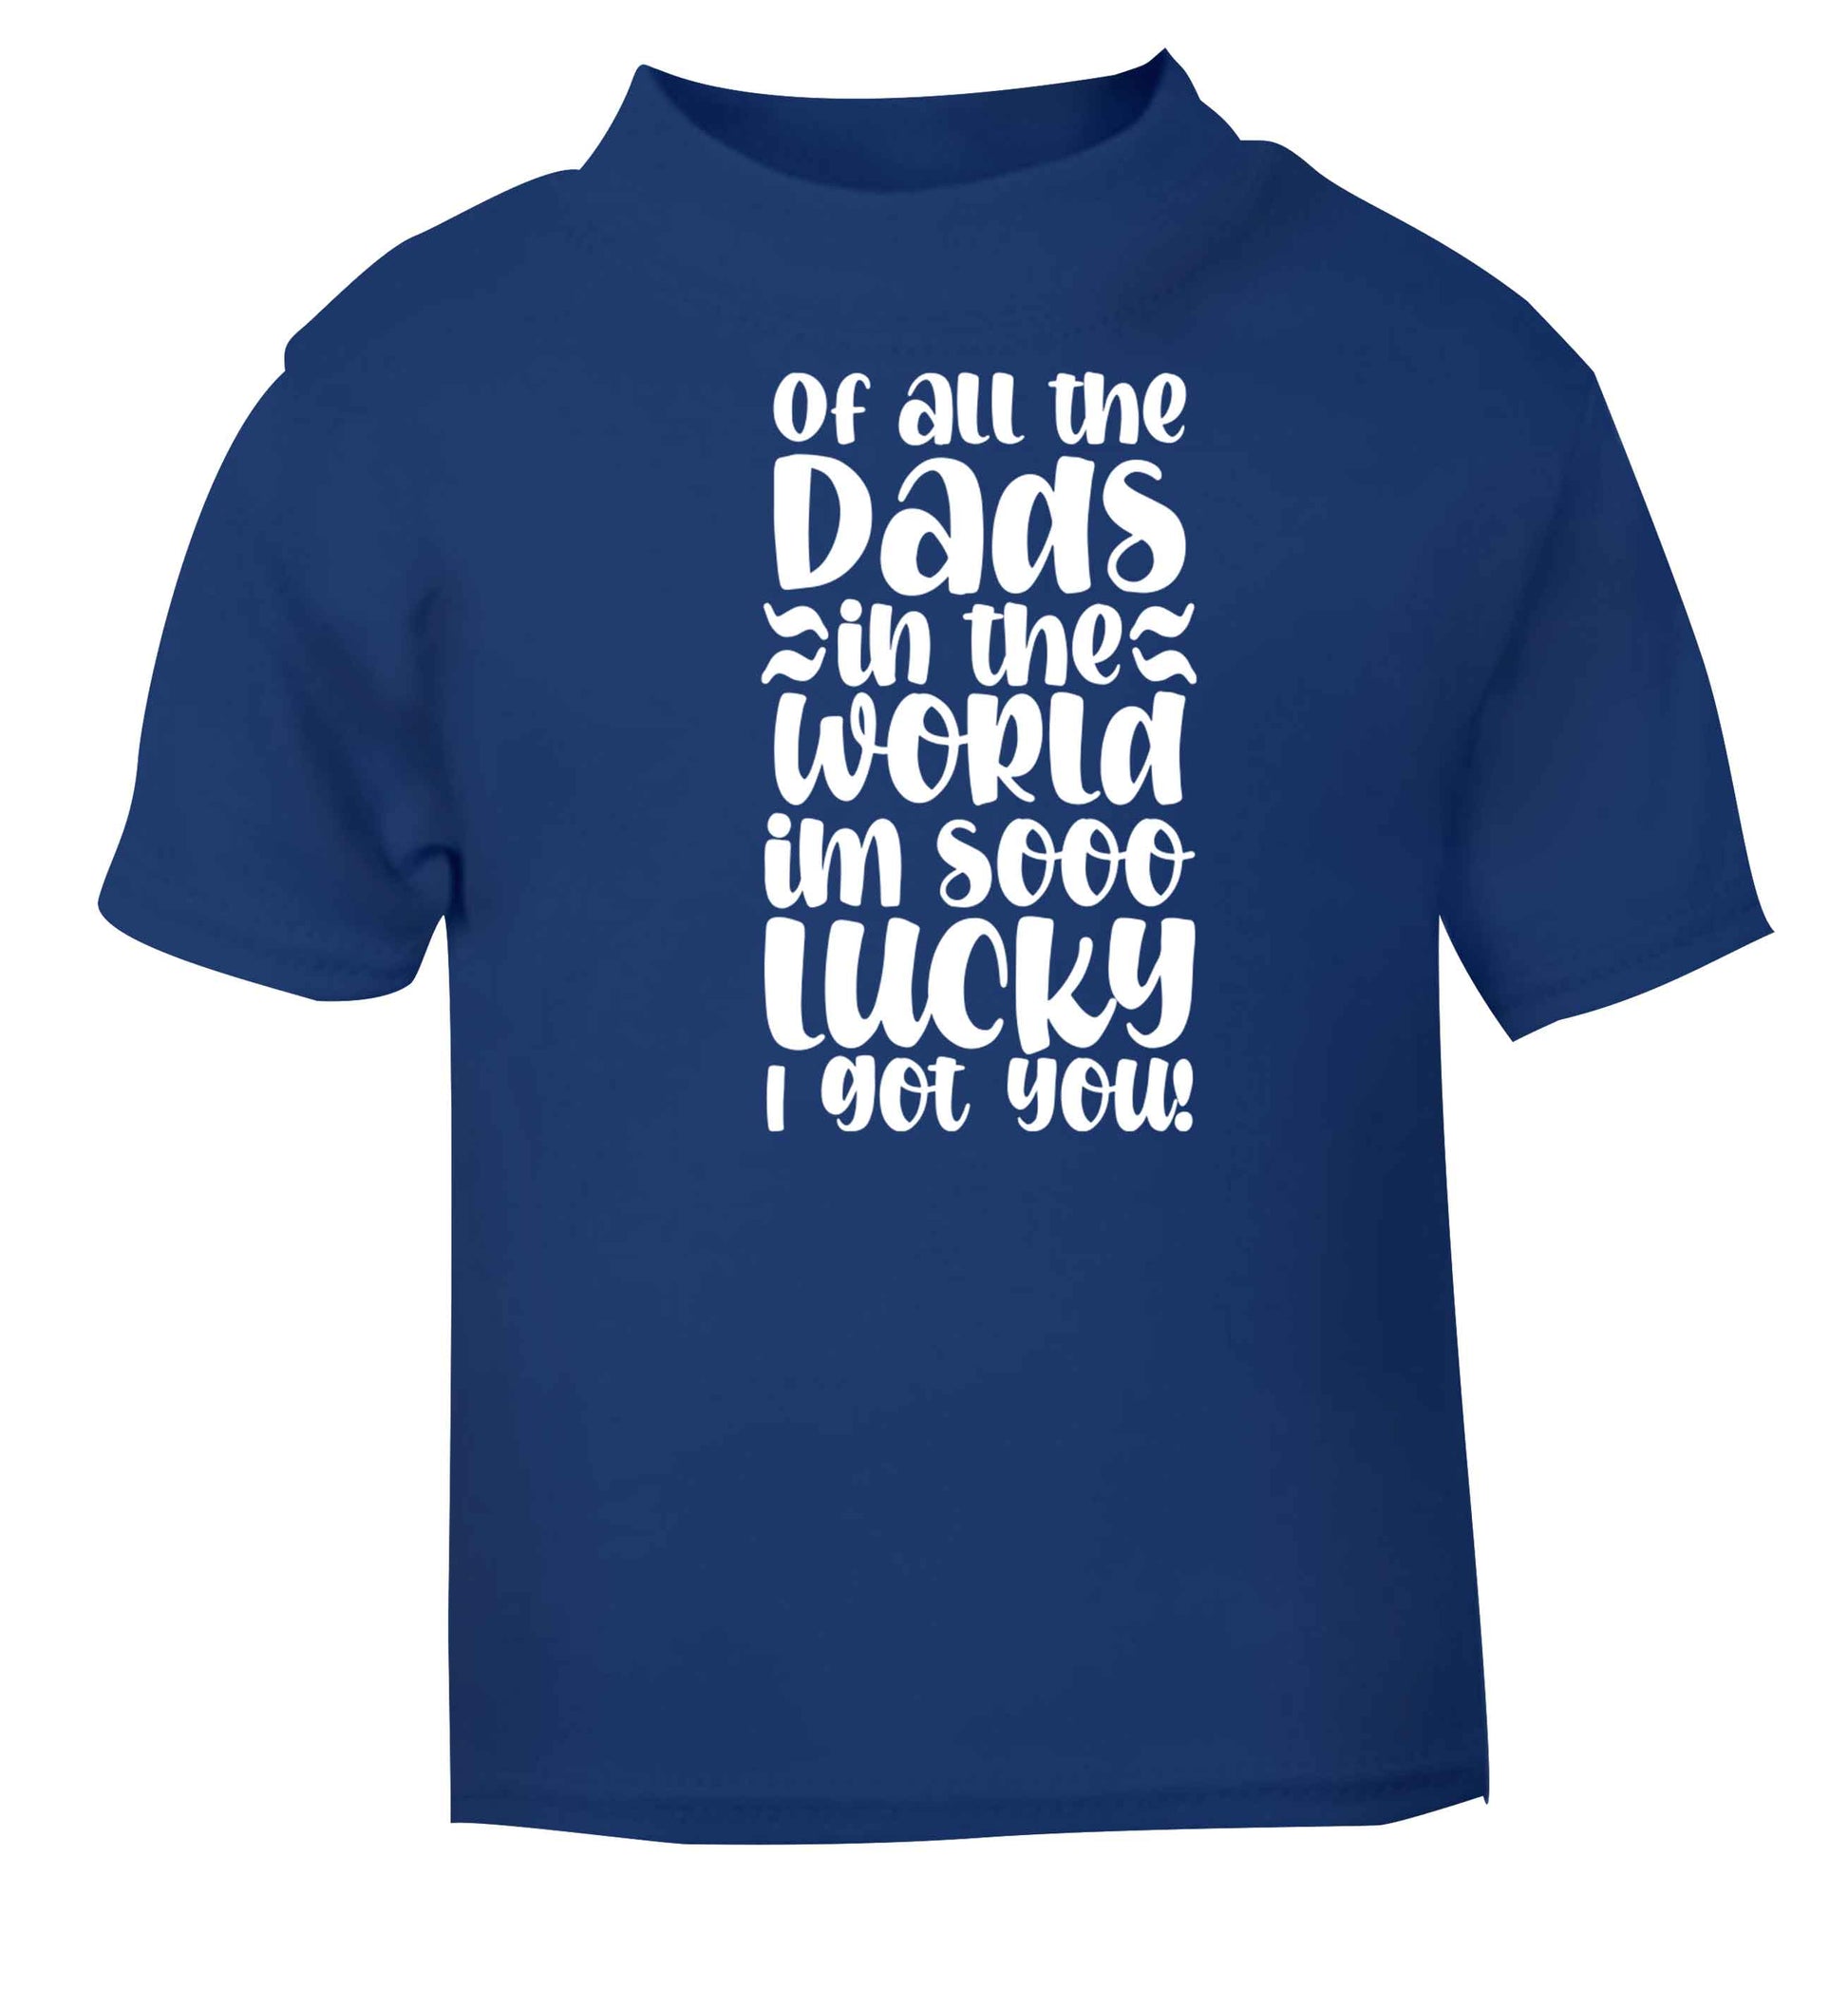 Of all the Dads in the world I'm so lucky I got you blue baby toddler Tshirt 2 Years